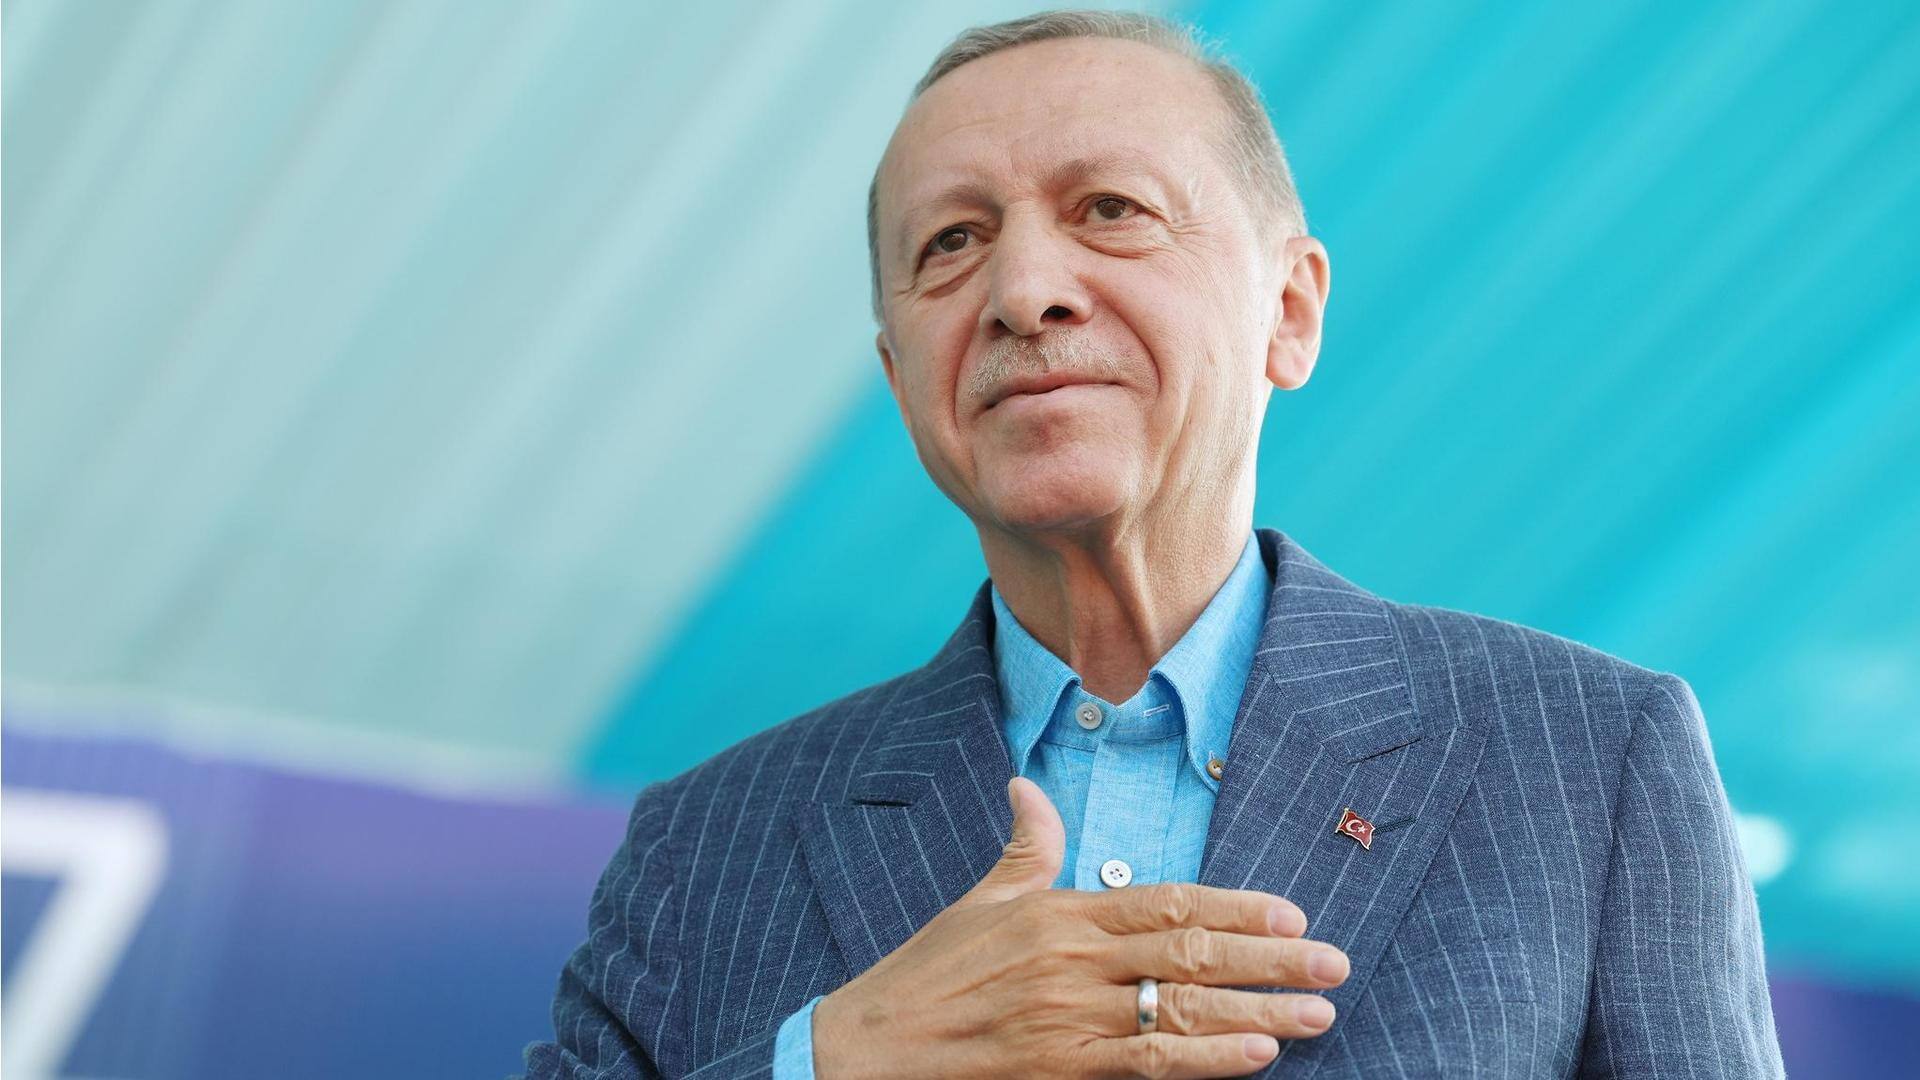 Turkey: Erdogan wins presidential election, extends rule to 3rd decade